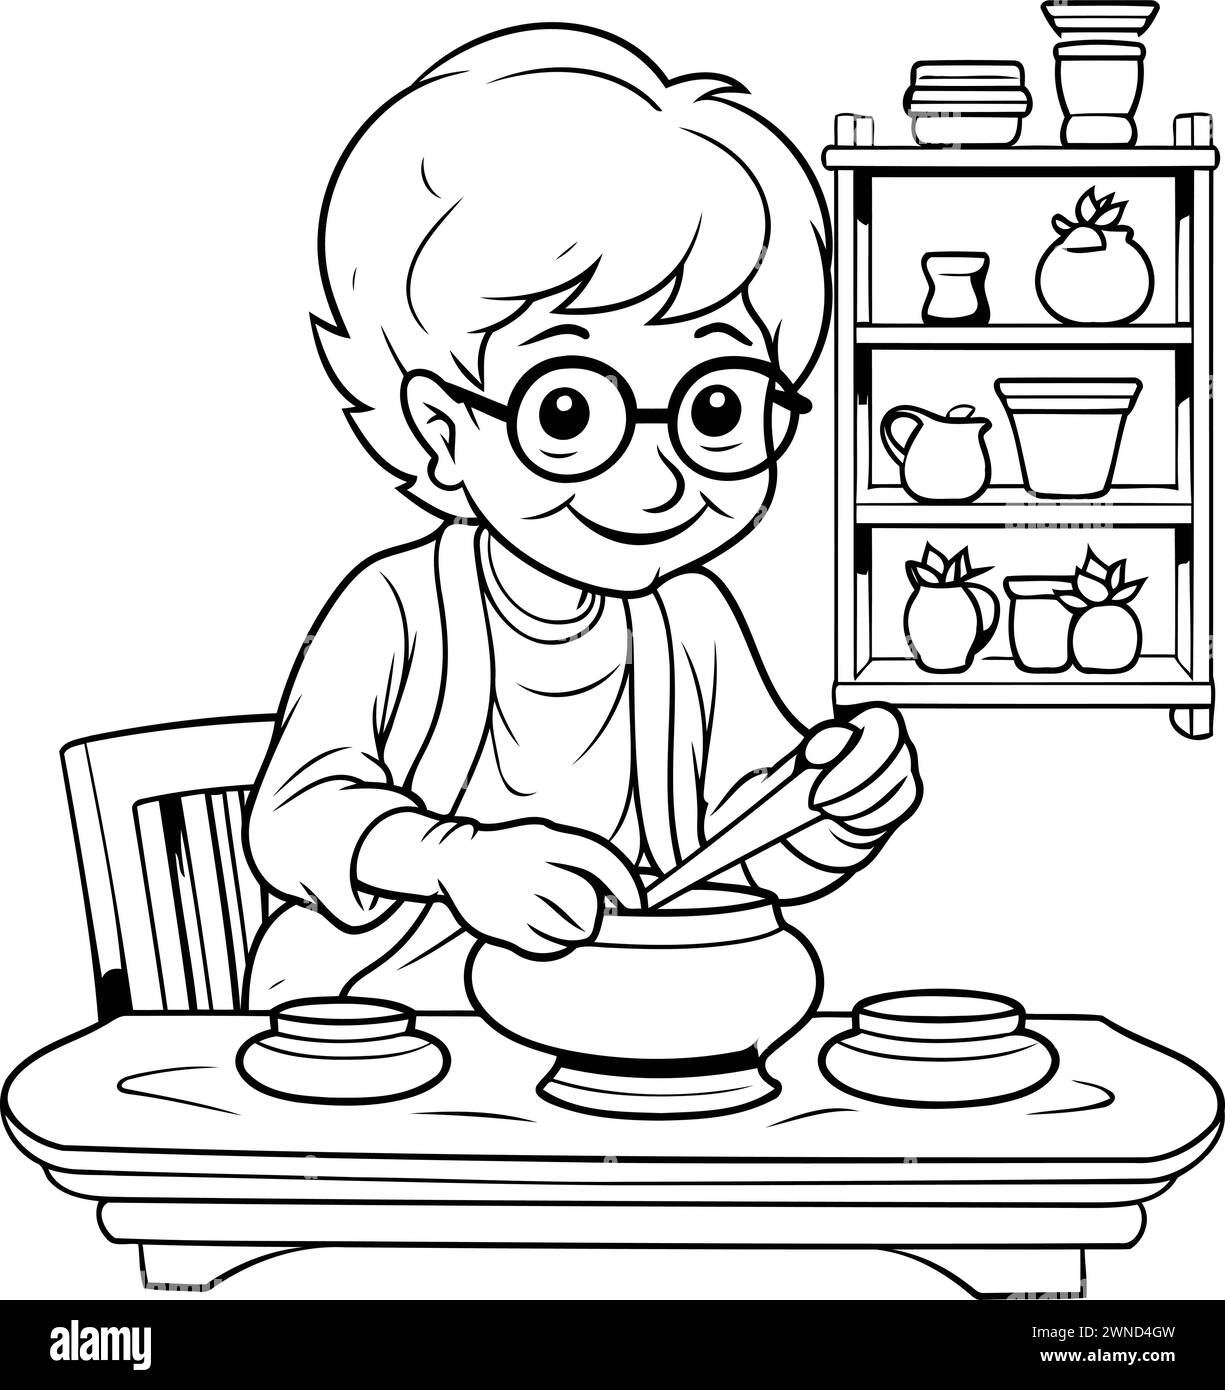 Boy playing pottery. Black and white vector illustration for coloring book. Stock Vector